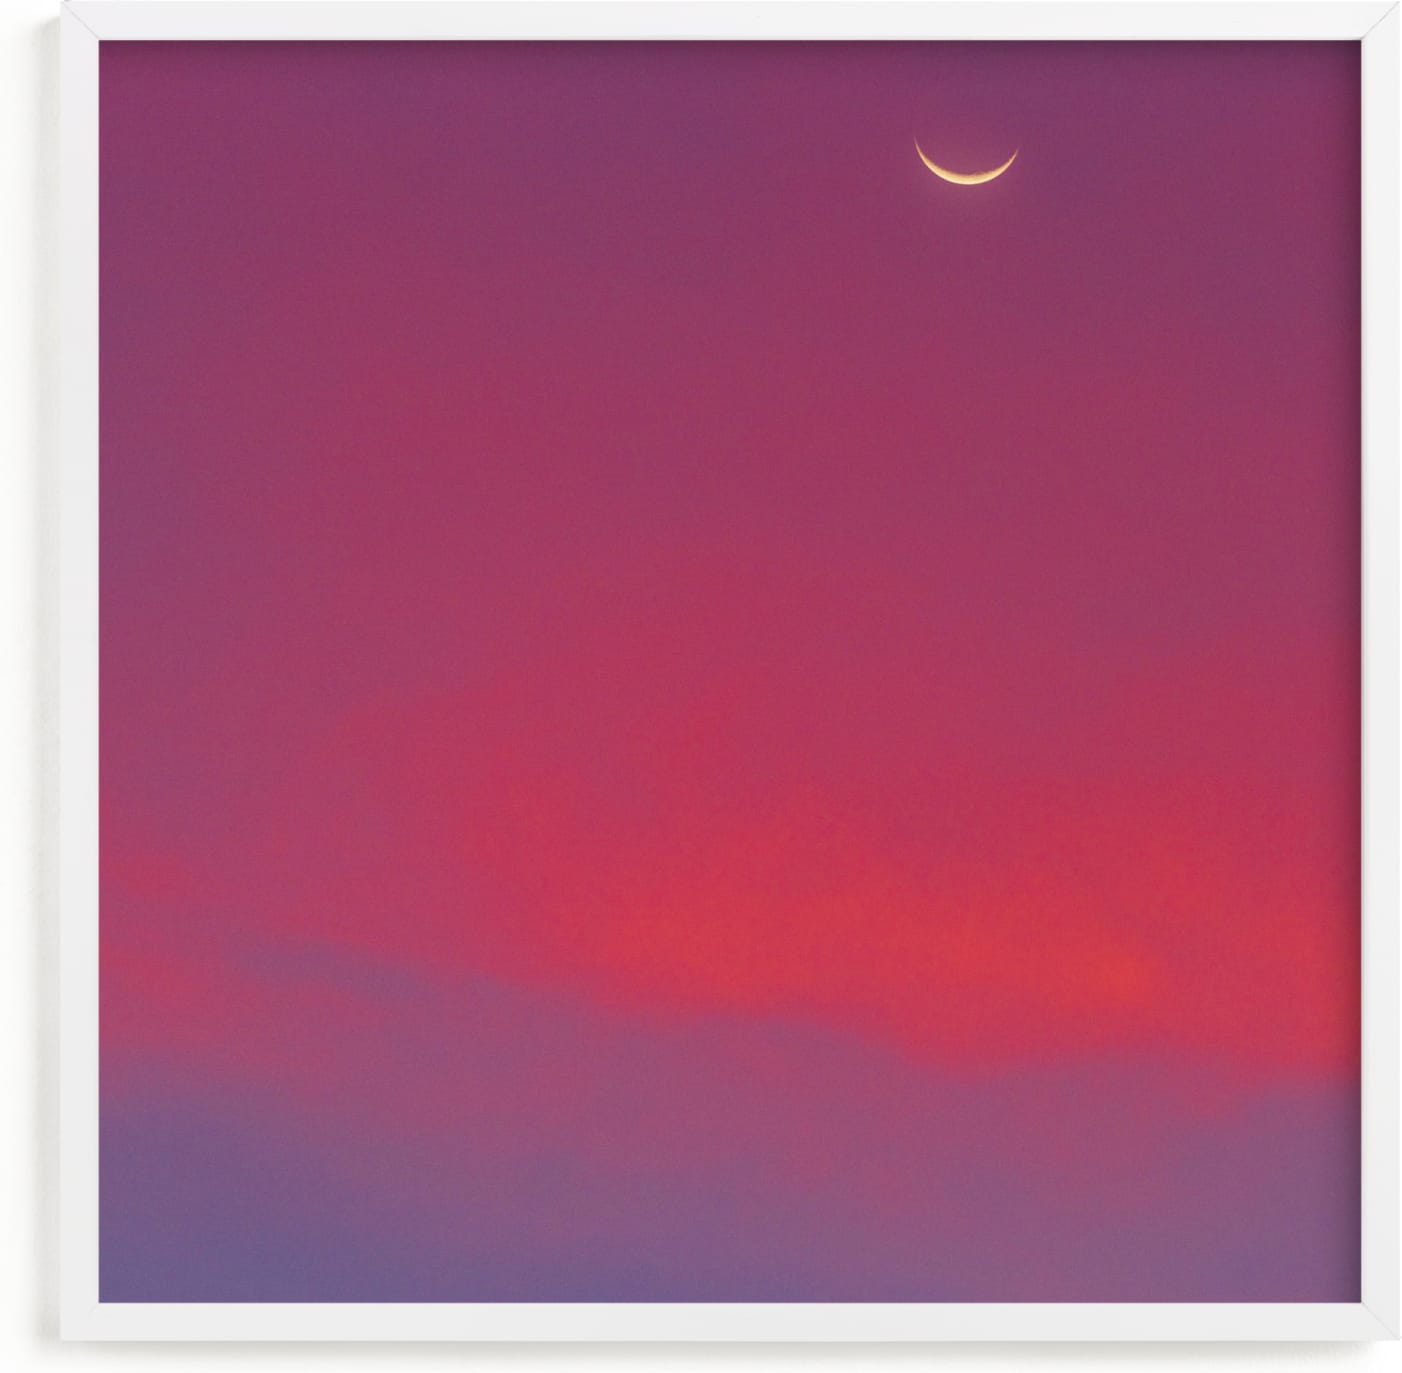 This is a purple art by James Derit called Crescent Moon and Purple Skies.